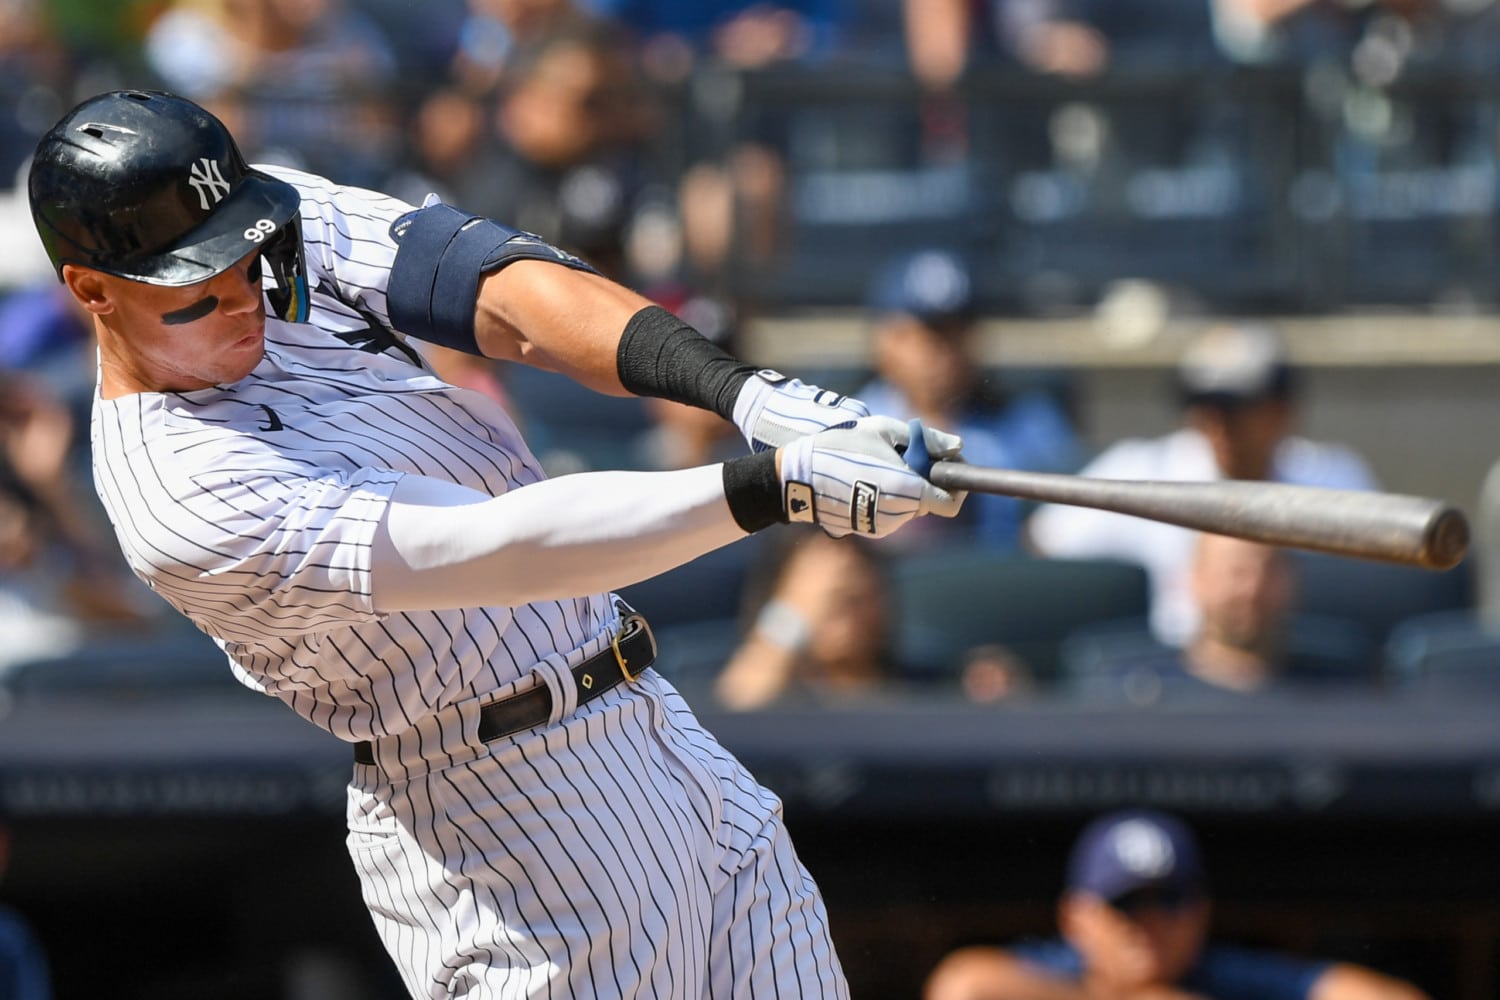 Yankees' Aaron Judge poised to make history in the Bronx in home